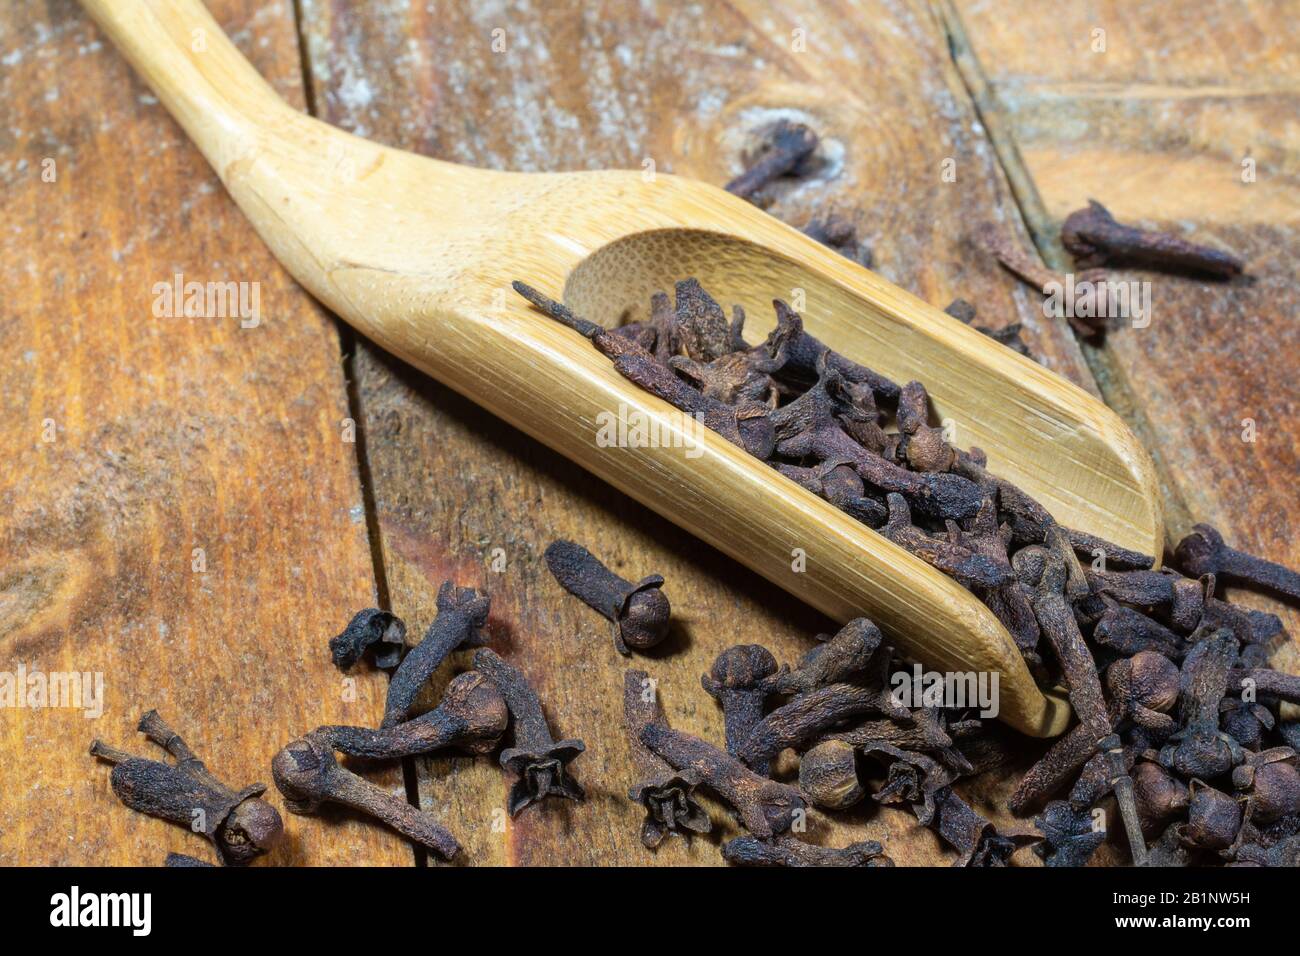 Dried whole Cloves (Syzygium aromaticum) in a wooden scoop Stock Photo